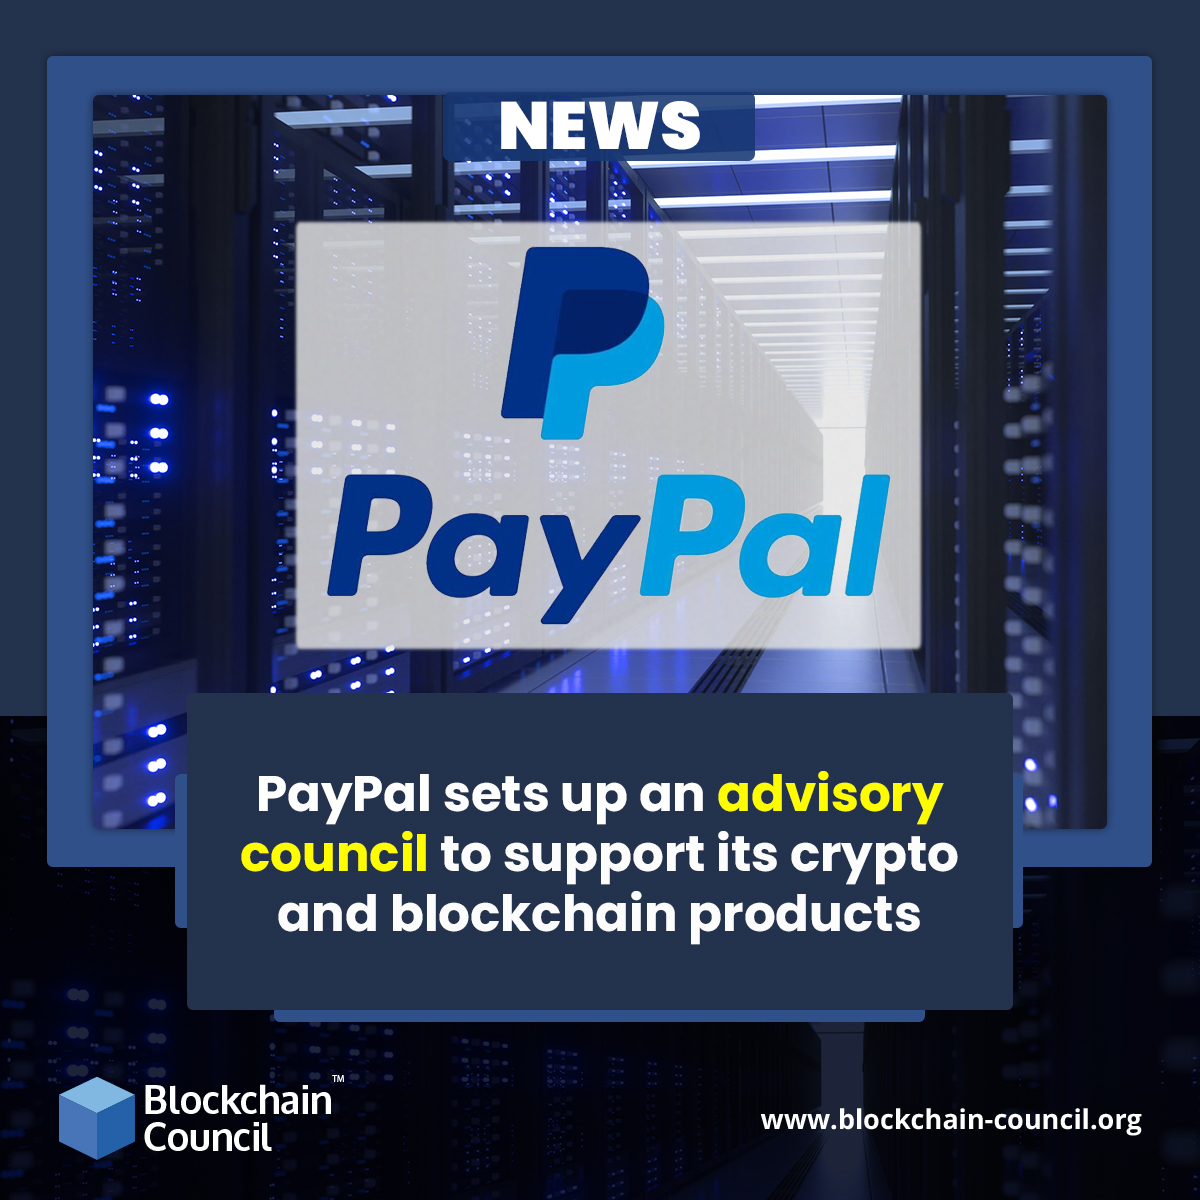 PayPal sets up an advisory council to support its crypto and blockchain products